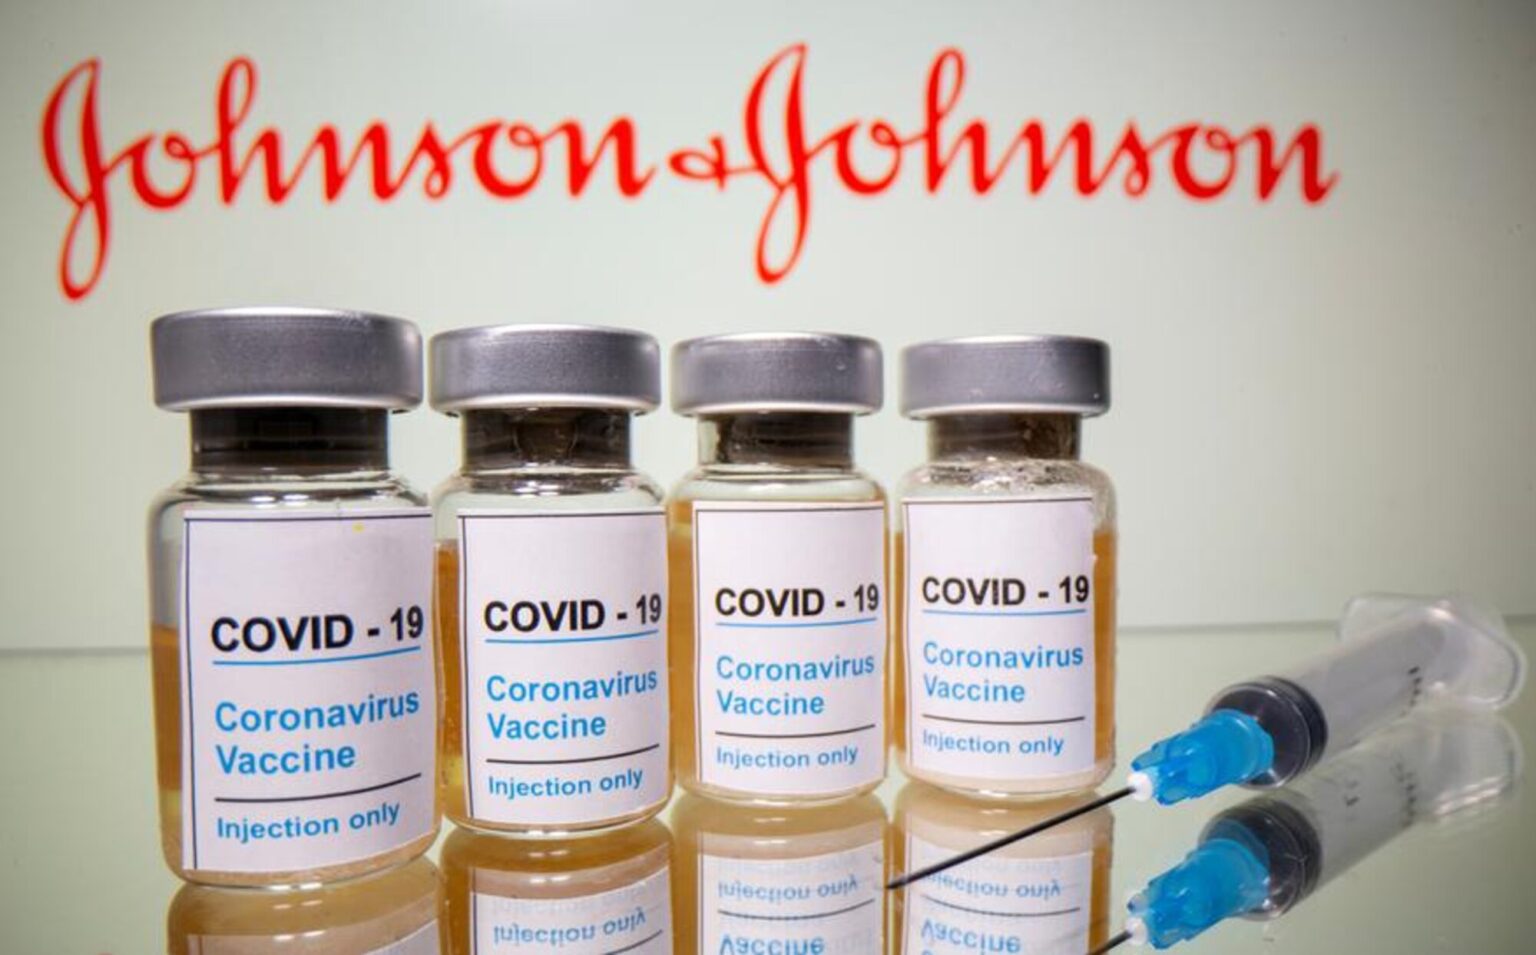 Just how effective did the one-dose Johnson and Johnson vaccine prove to be in clinical trials? Find out if you'll have a chance to be vaccinated soon here.